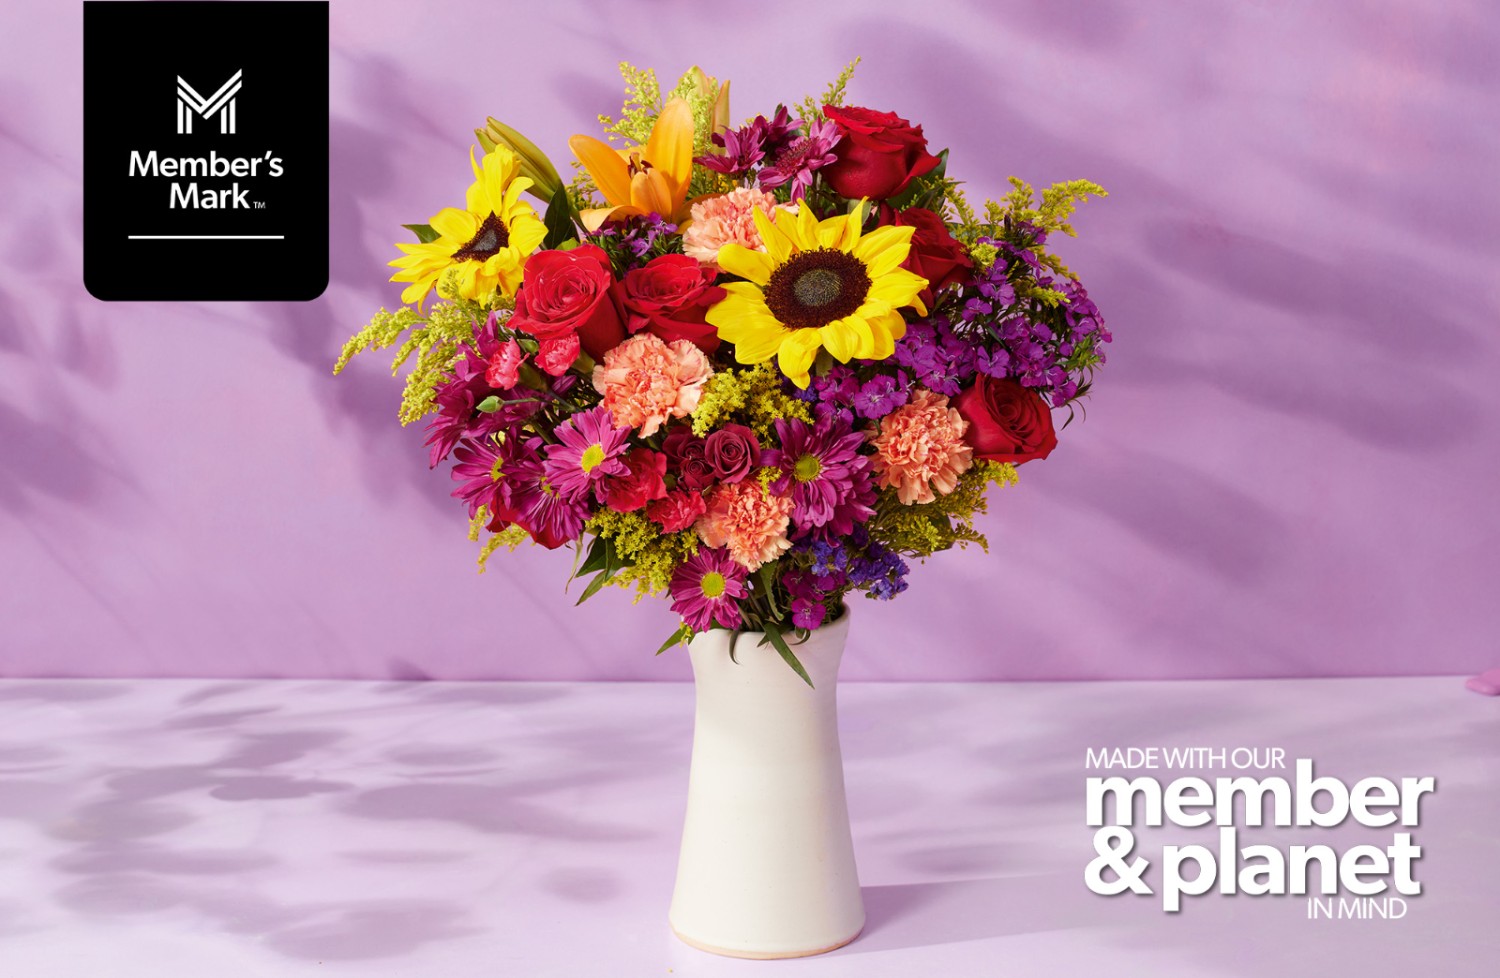 Celebrate Mother's Day and Mother Earth with These Member's Mark™ Fresh  Flowers